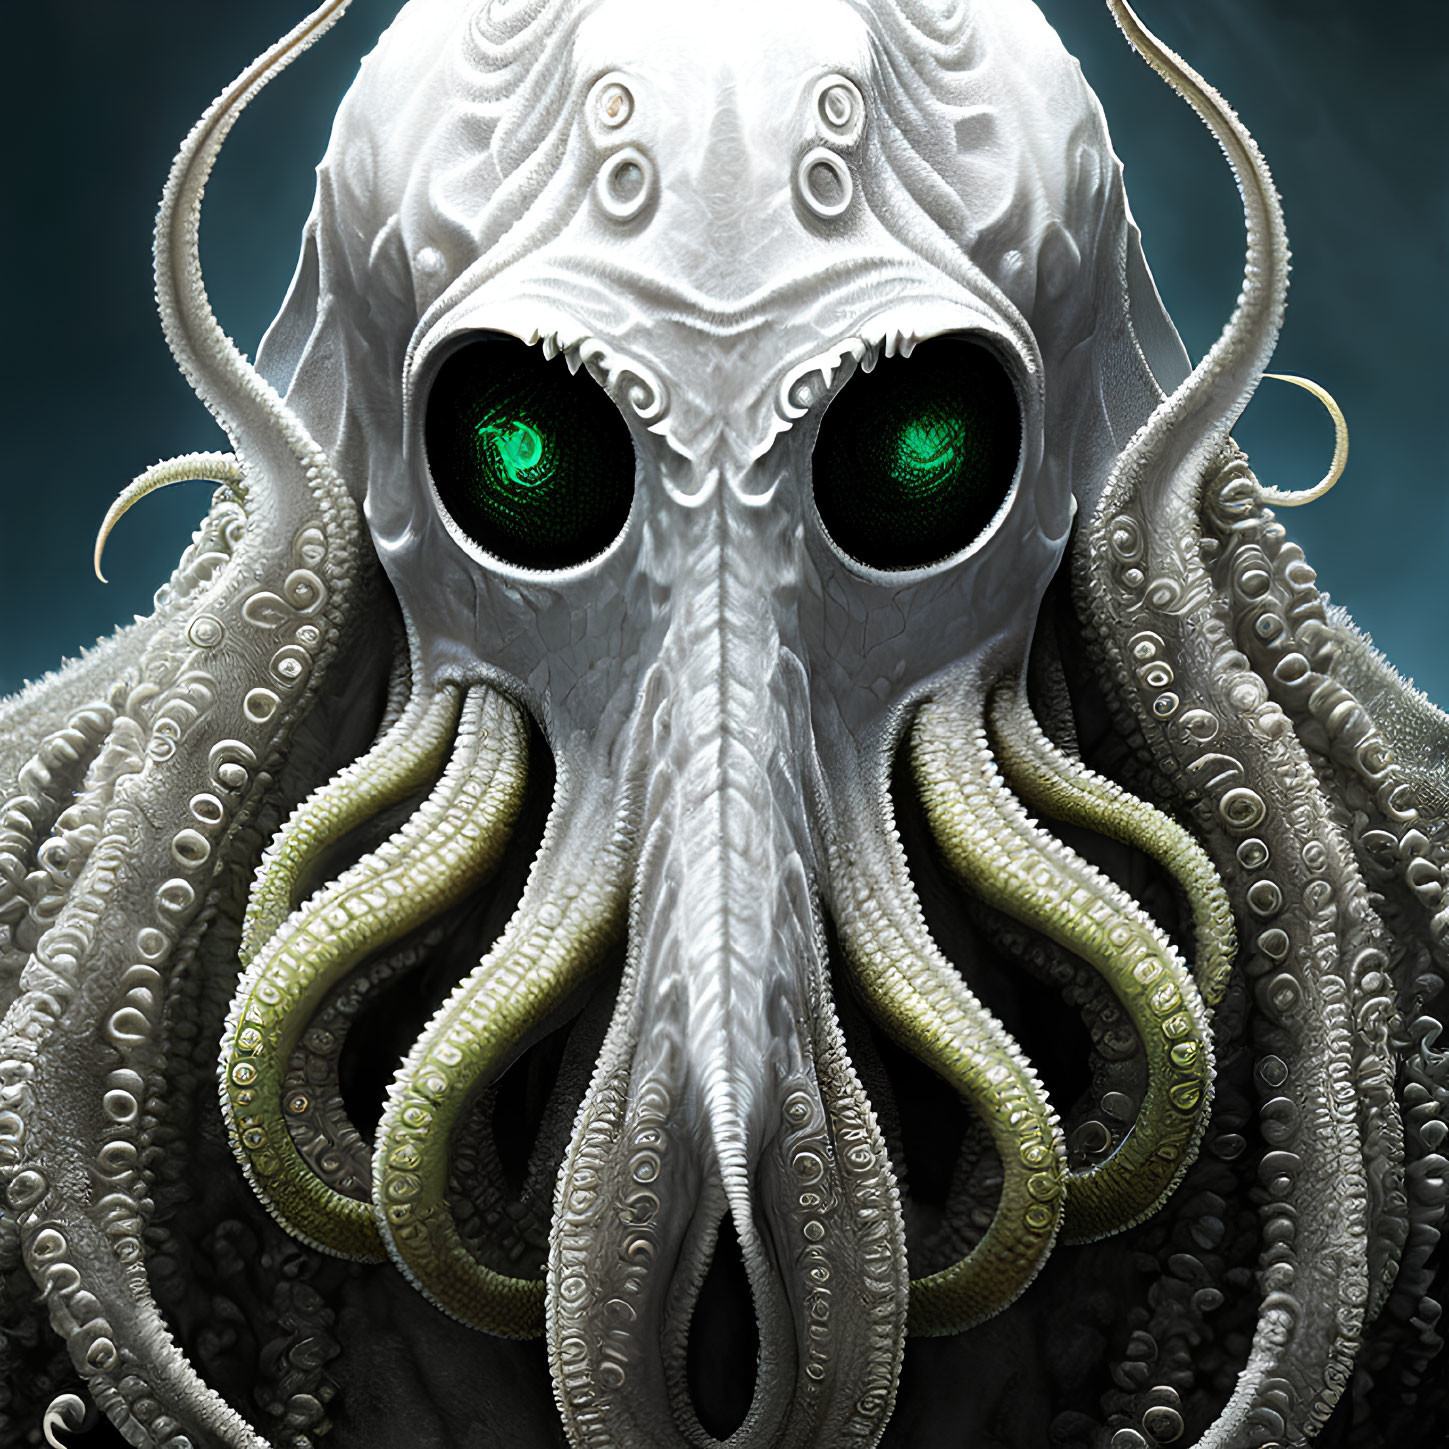 Detailed illustration of fantastical octopus-like creature with glowing green eyes